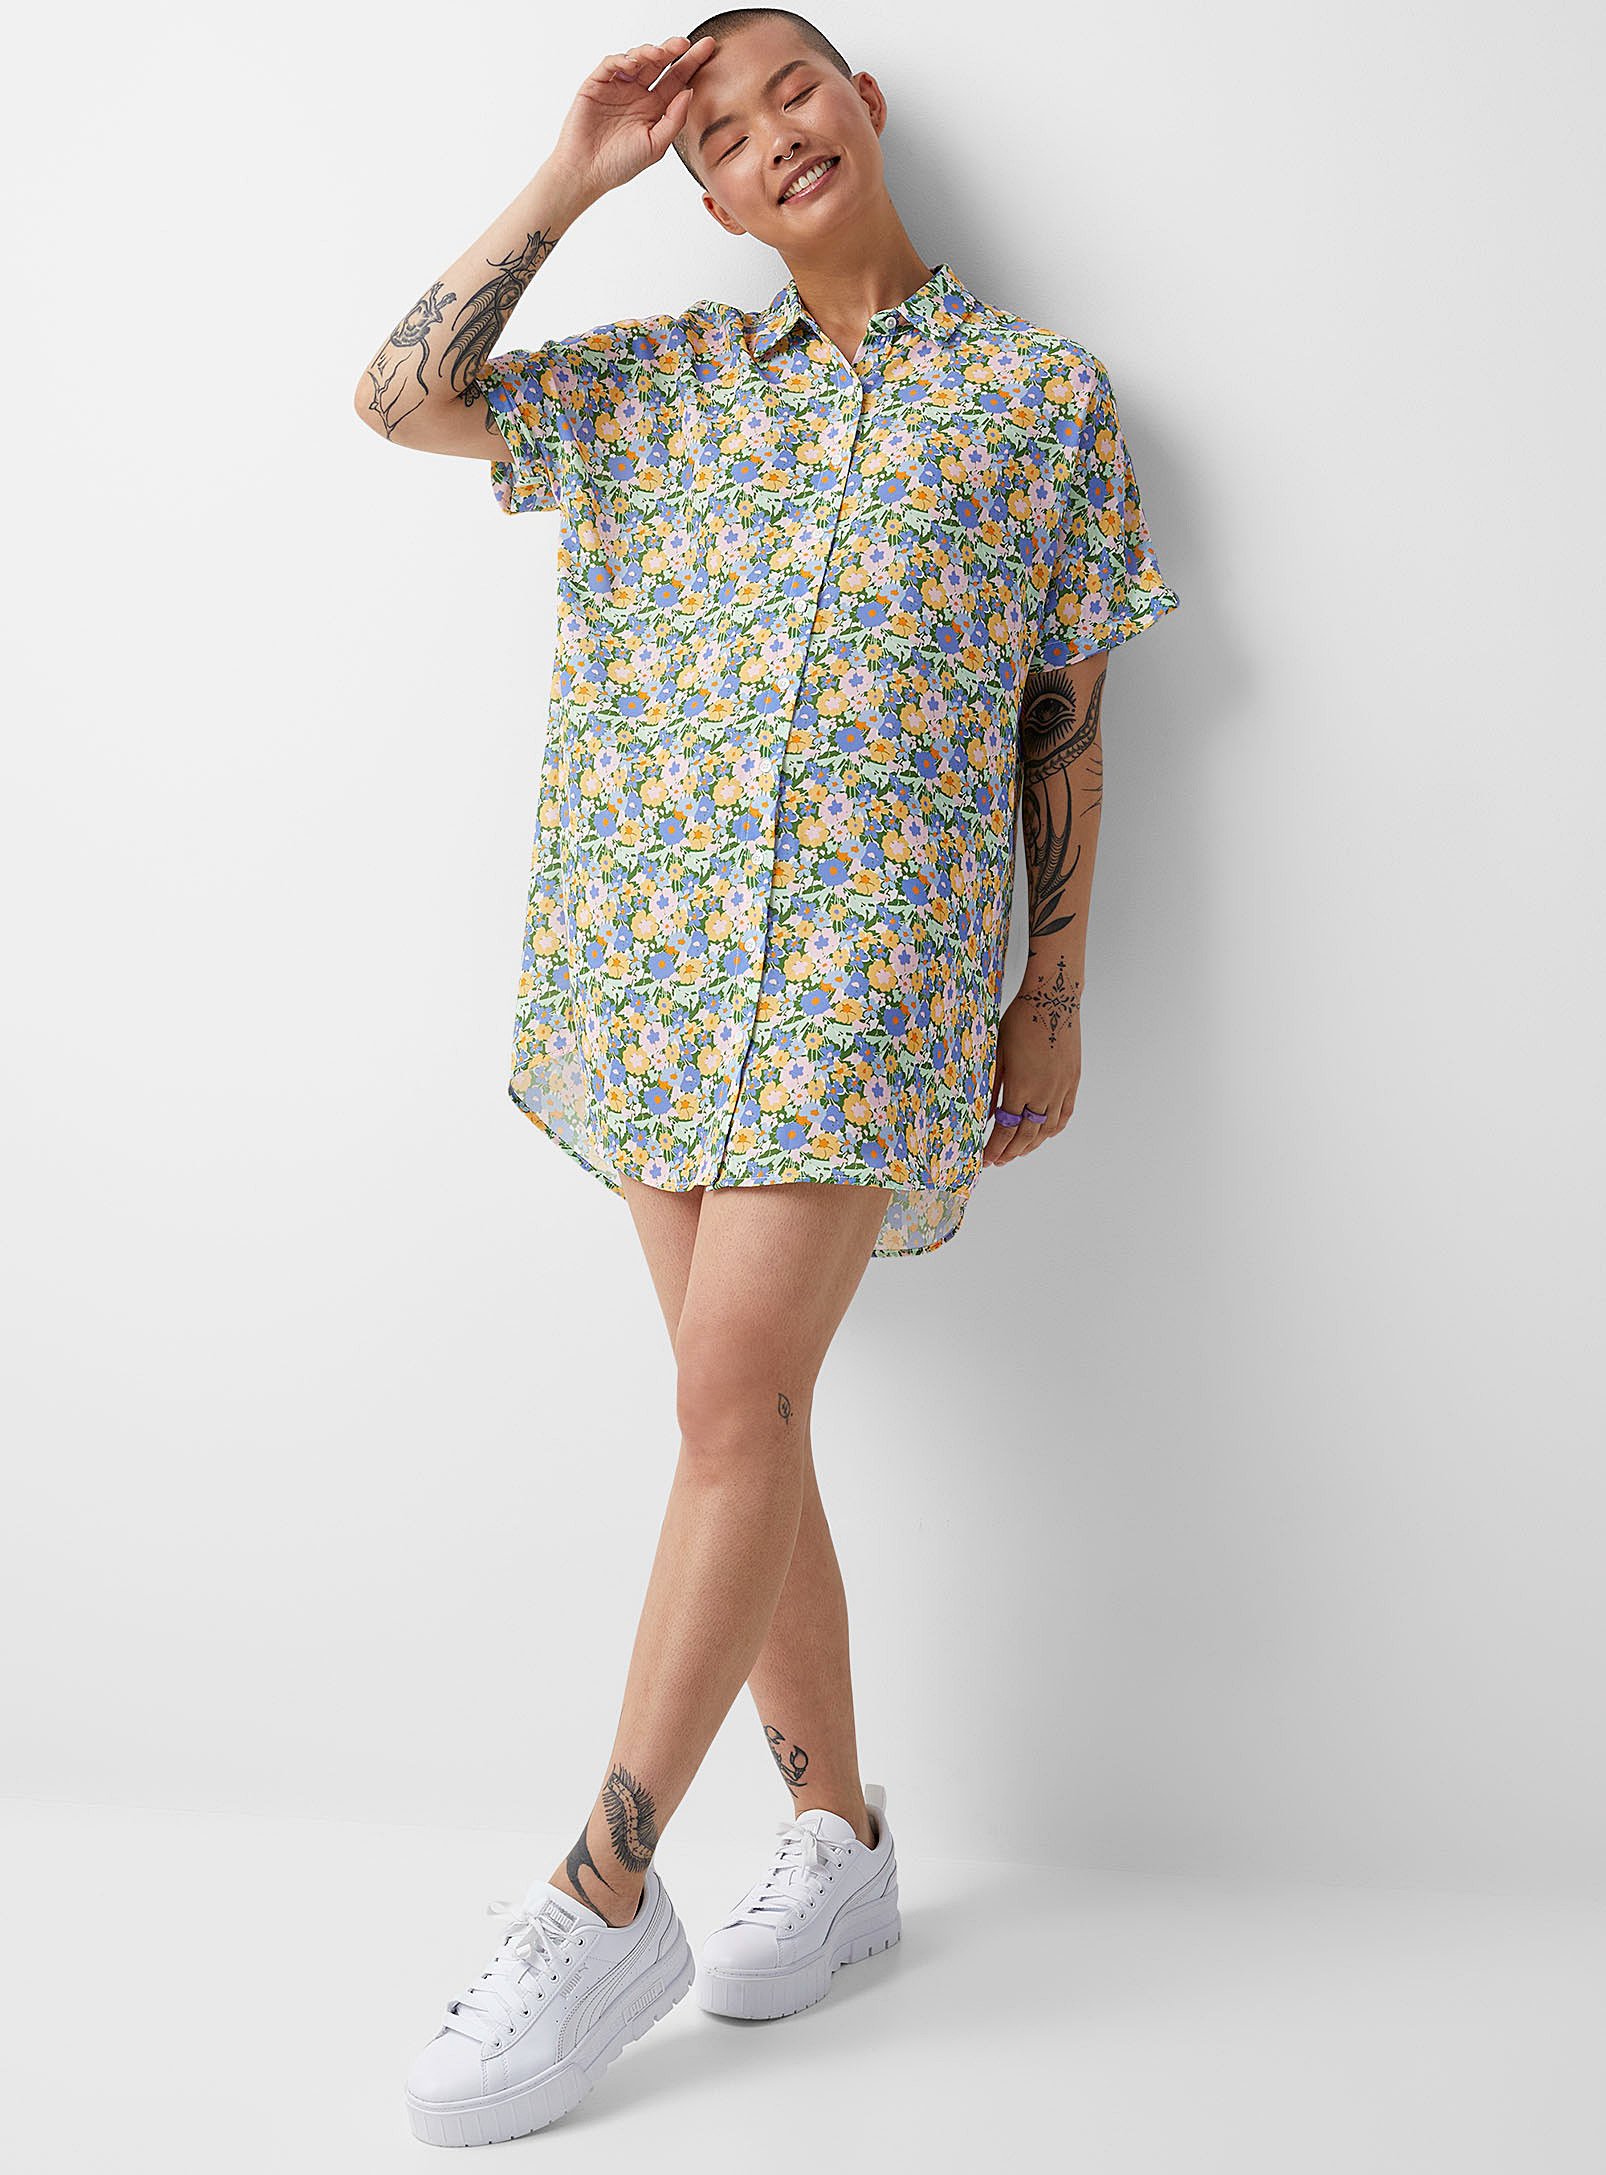 A person wearing a shirtdress with sneakers